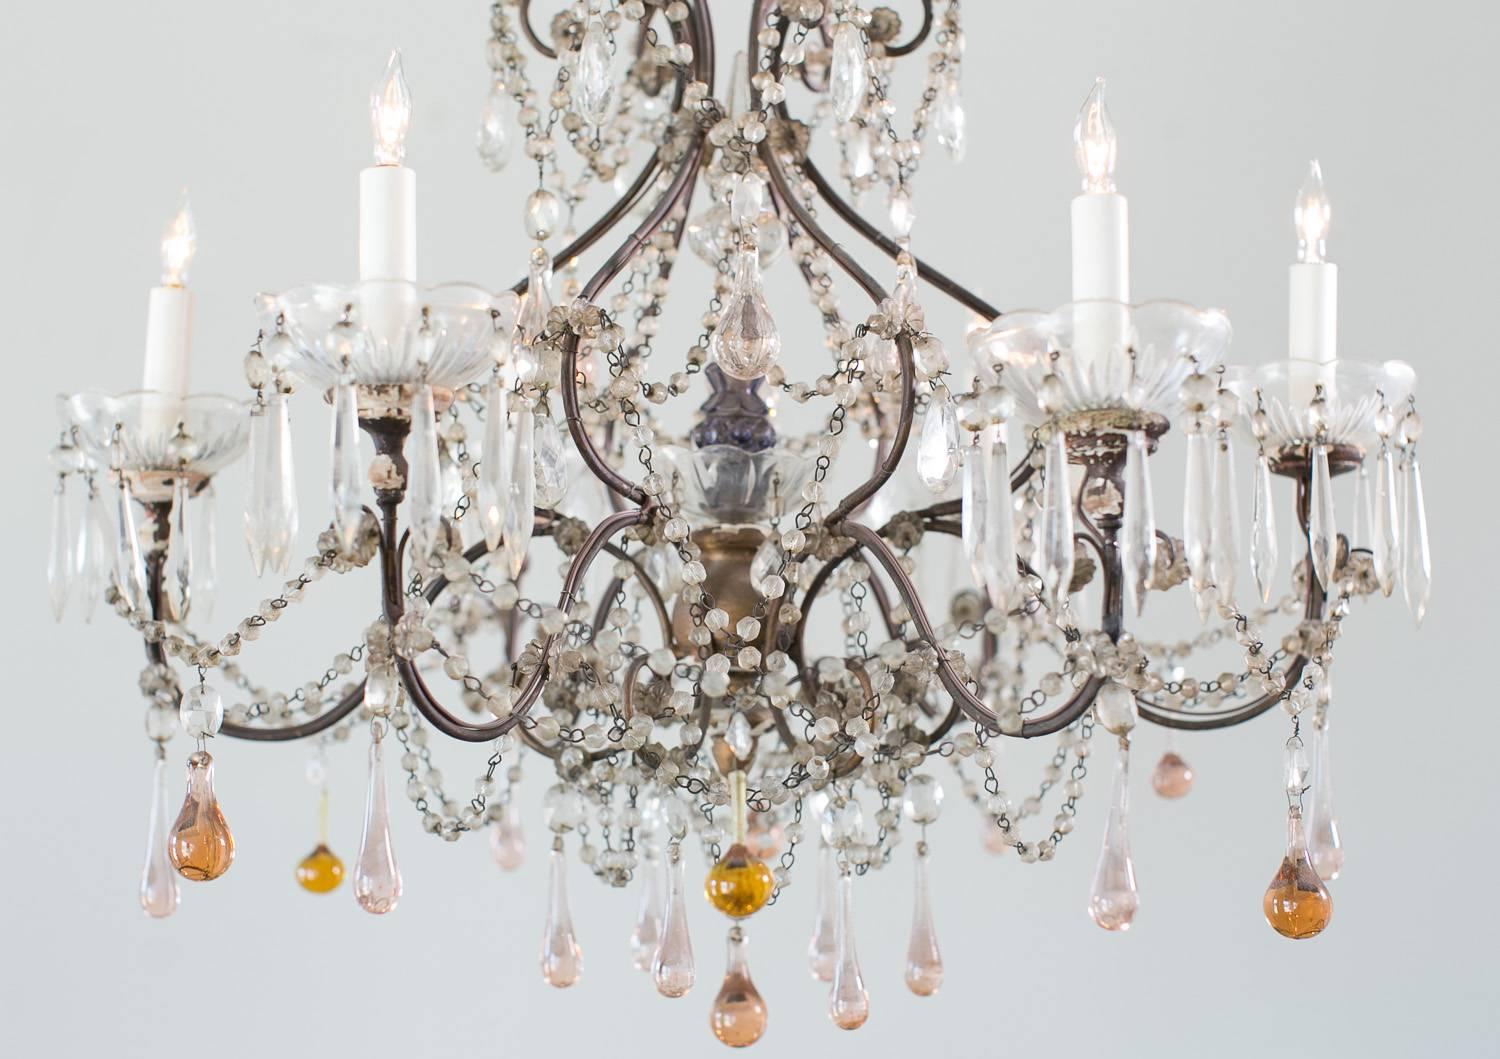 Antique chandelier with a plethora of small crystal beads connecting the six arms. Soft, peach colored teardrop crystals decorate the underside of this fabulous light. The centre features a lovely mix of beads and faceted crystals giving this piece